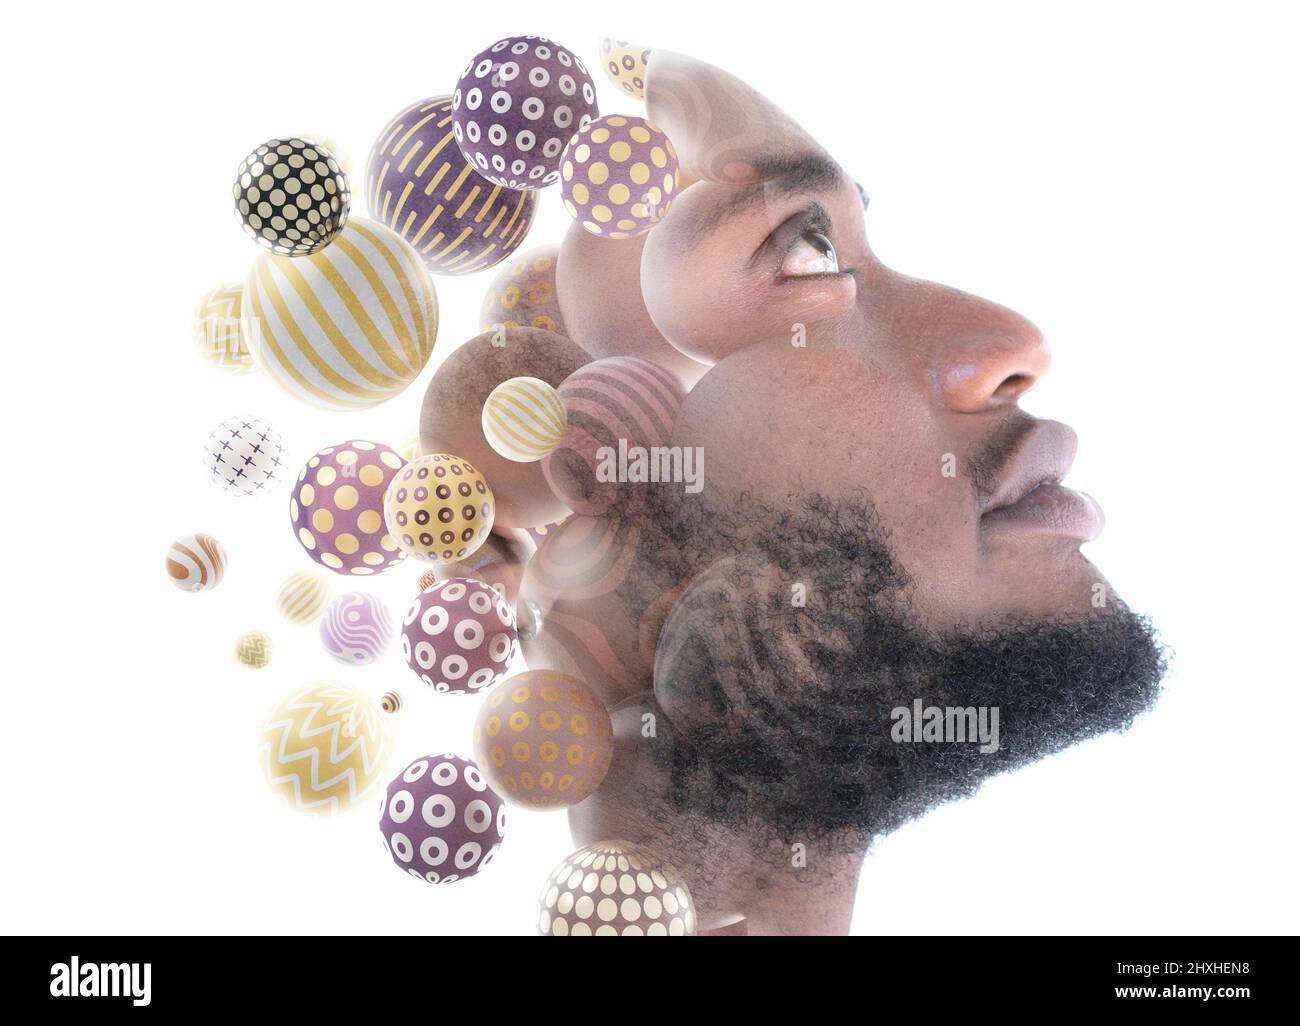 Computer graphics combined with a portrait of a young African American man Stock Photo